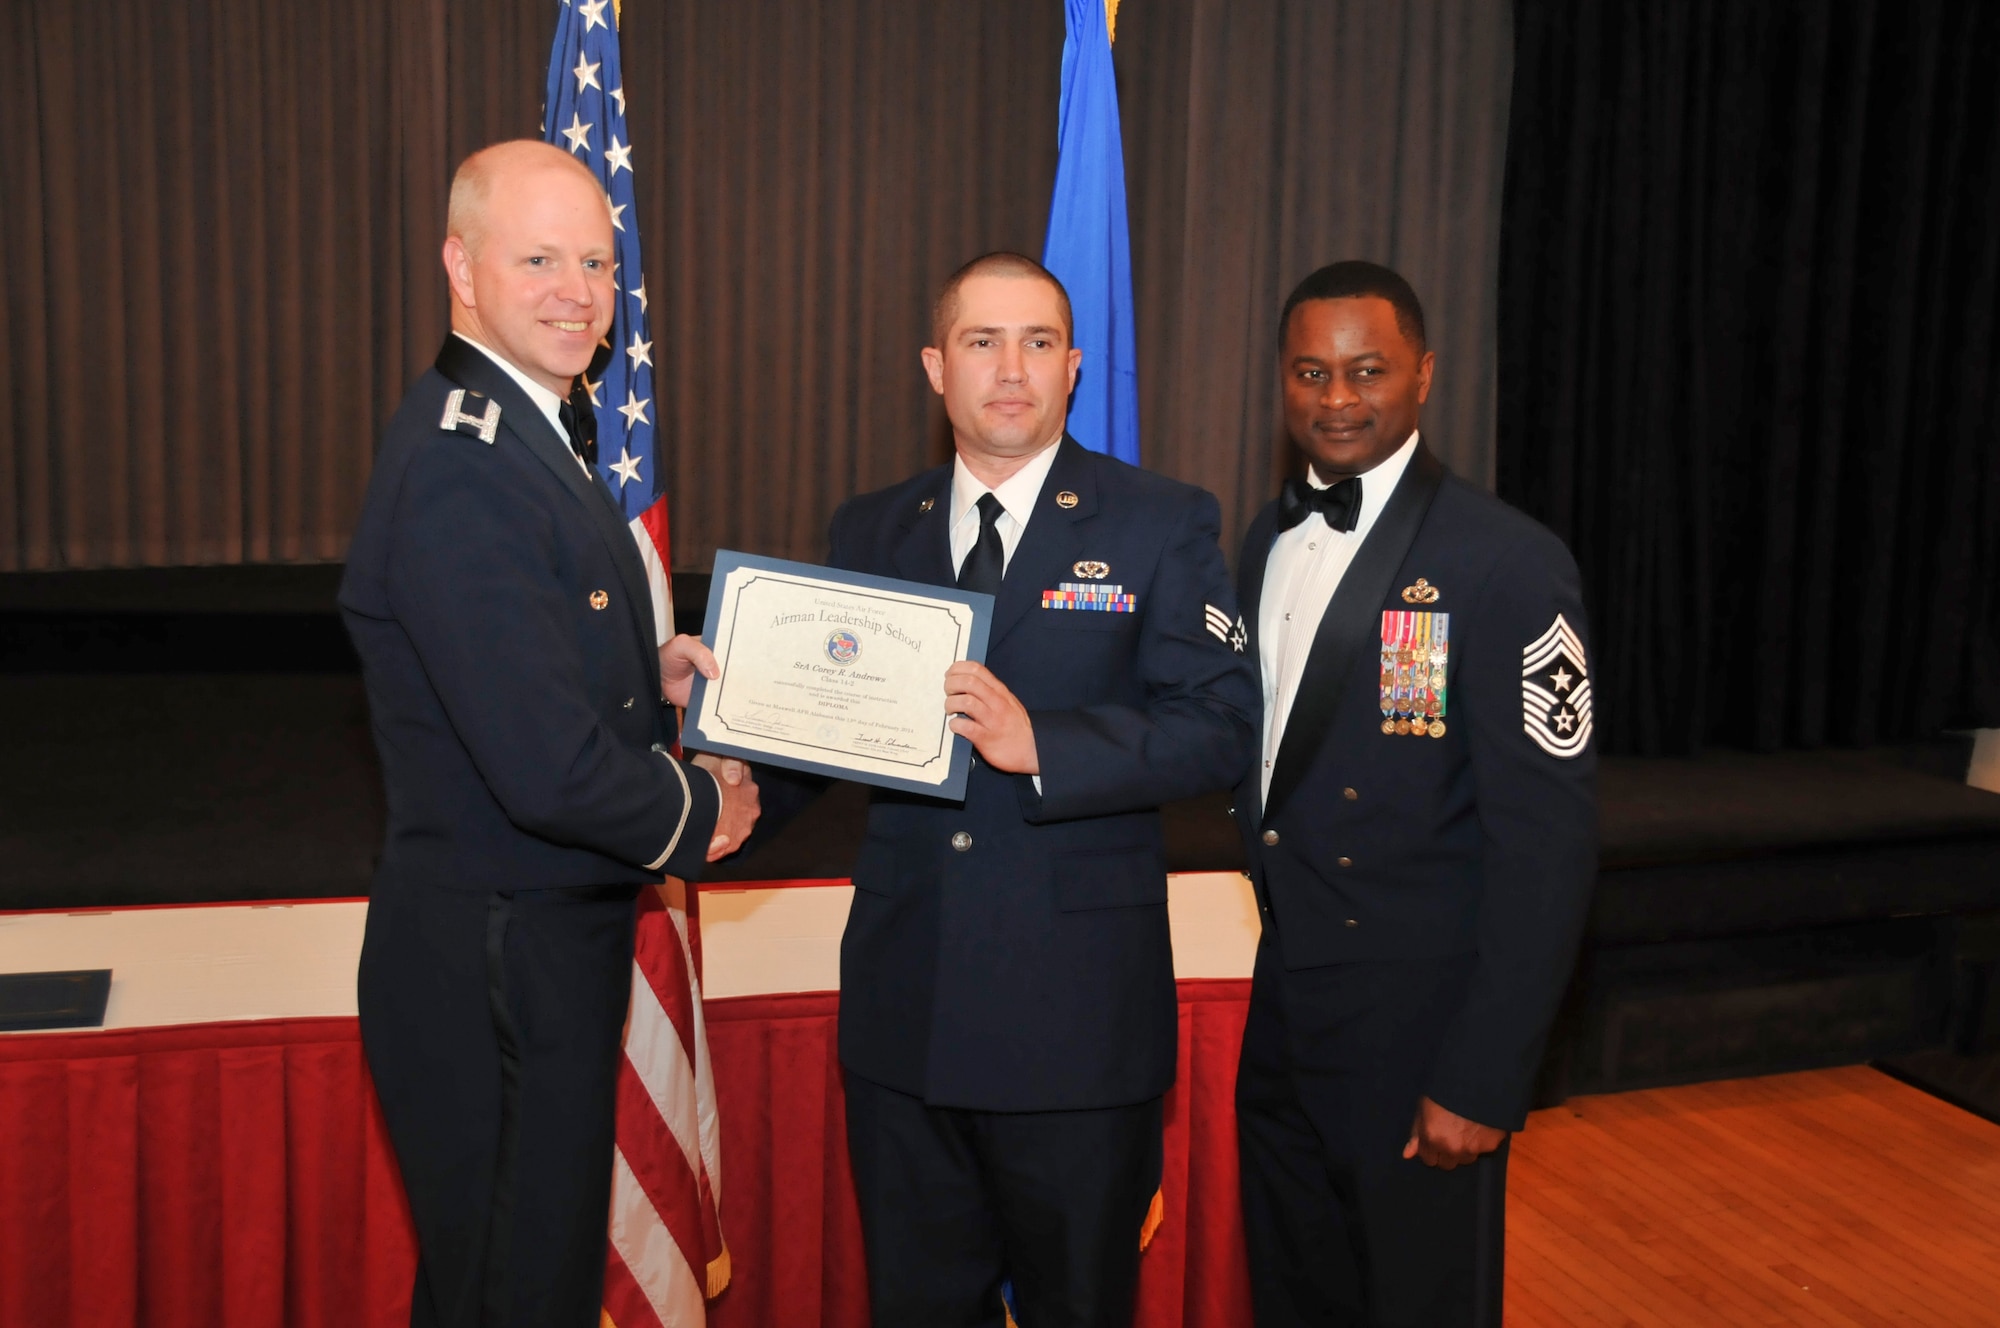 U.S. Air Force Col. Mark Ramsey, Vice Commander 42nd Air Base Wing, and Chief Master Sgt. Harry Hutchinson, Command Chief 42nd Air Base Wing, presents the Airman Leadership School graduating diploma to Senior Airman Corey Andrews, 187th Civil Engineer Squadron, at Maxwell Air Force Base, Ala., Feb. 13, 2014. Airman Leadership School teaches leadership and supervisory skills to Senior Airmen and is required for Airmen to become Noncommissioned Officers.(U.S. Air Force photo by Tech. Sgt. Matthew Garrett)